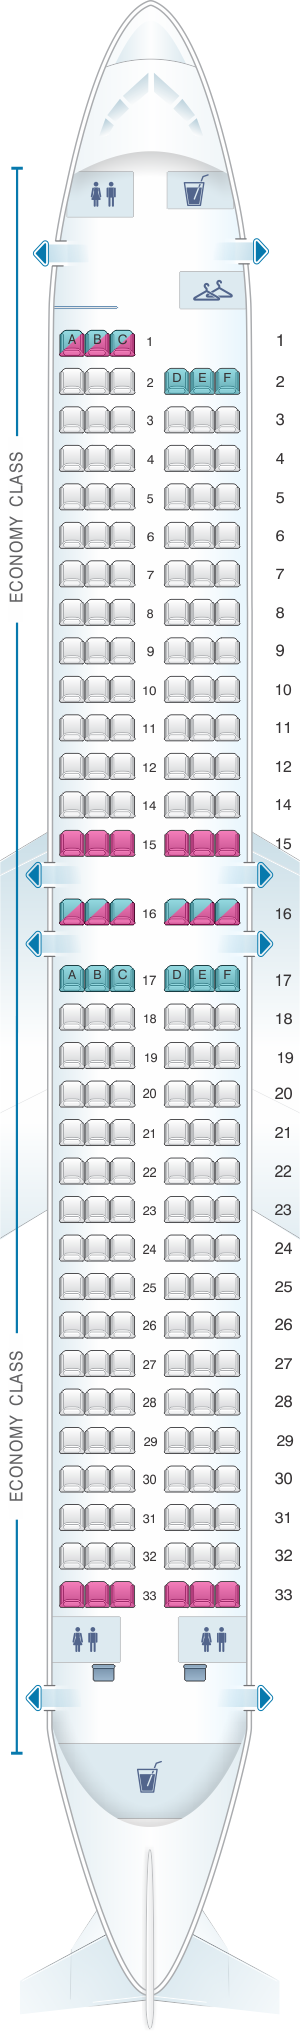 Seat map for Corendon Airlines Boeing B737 MAX 8